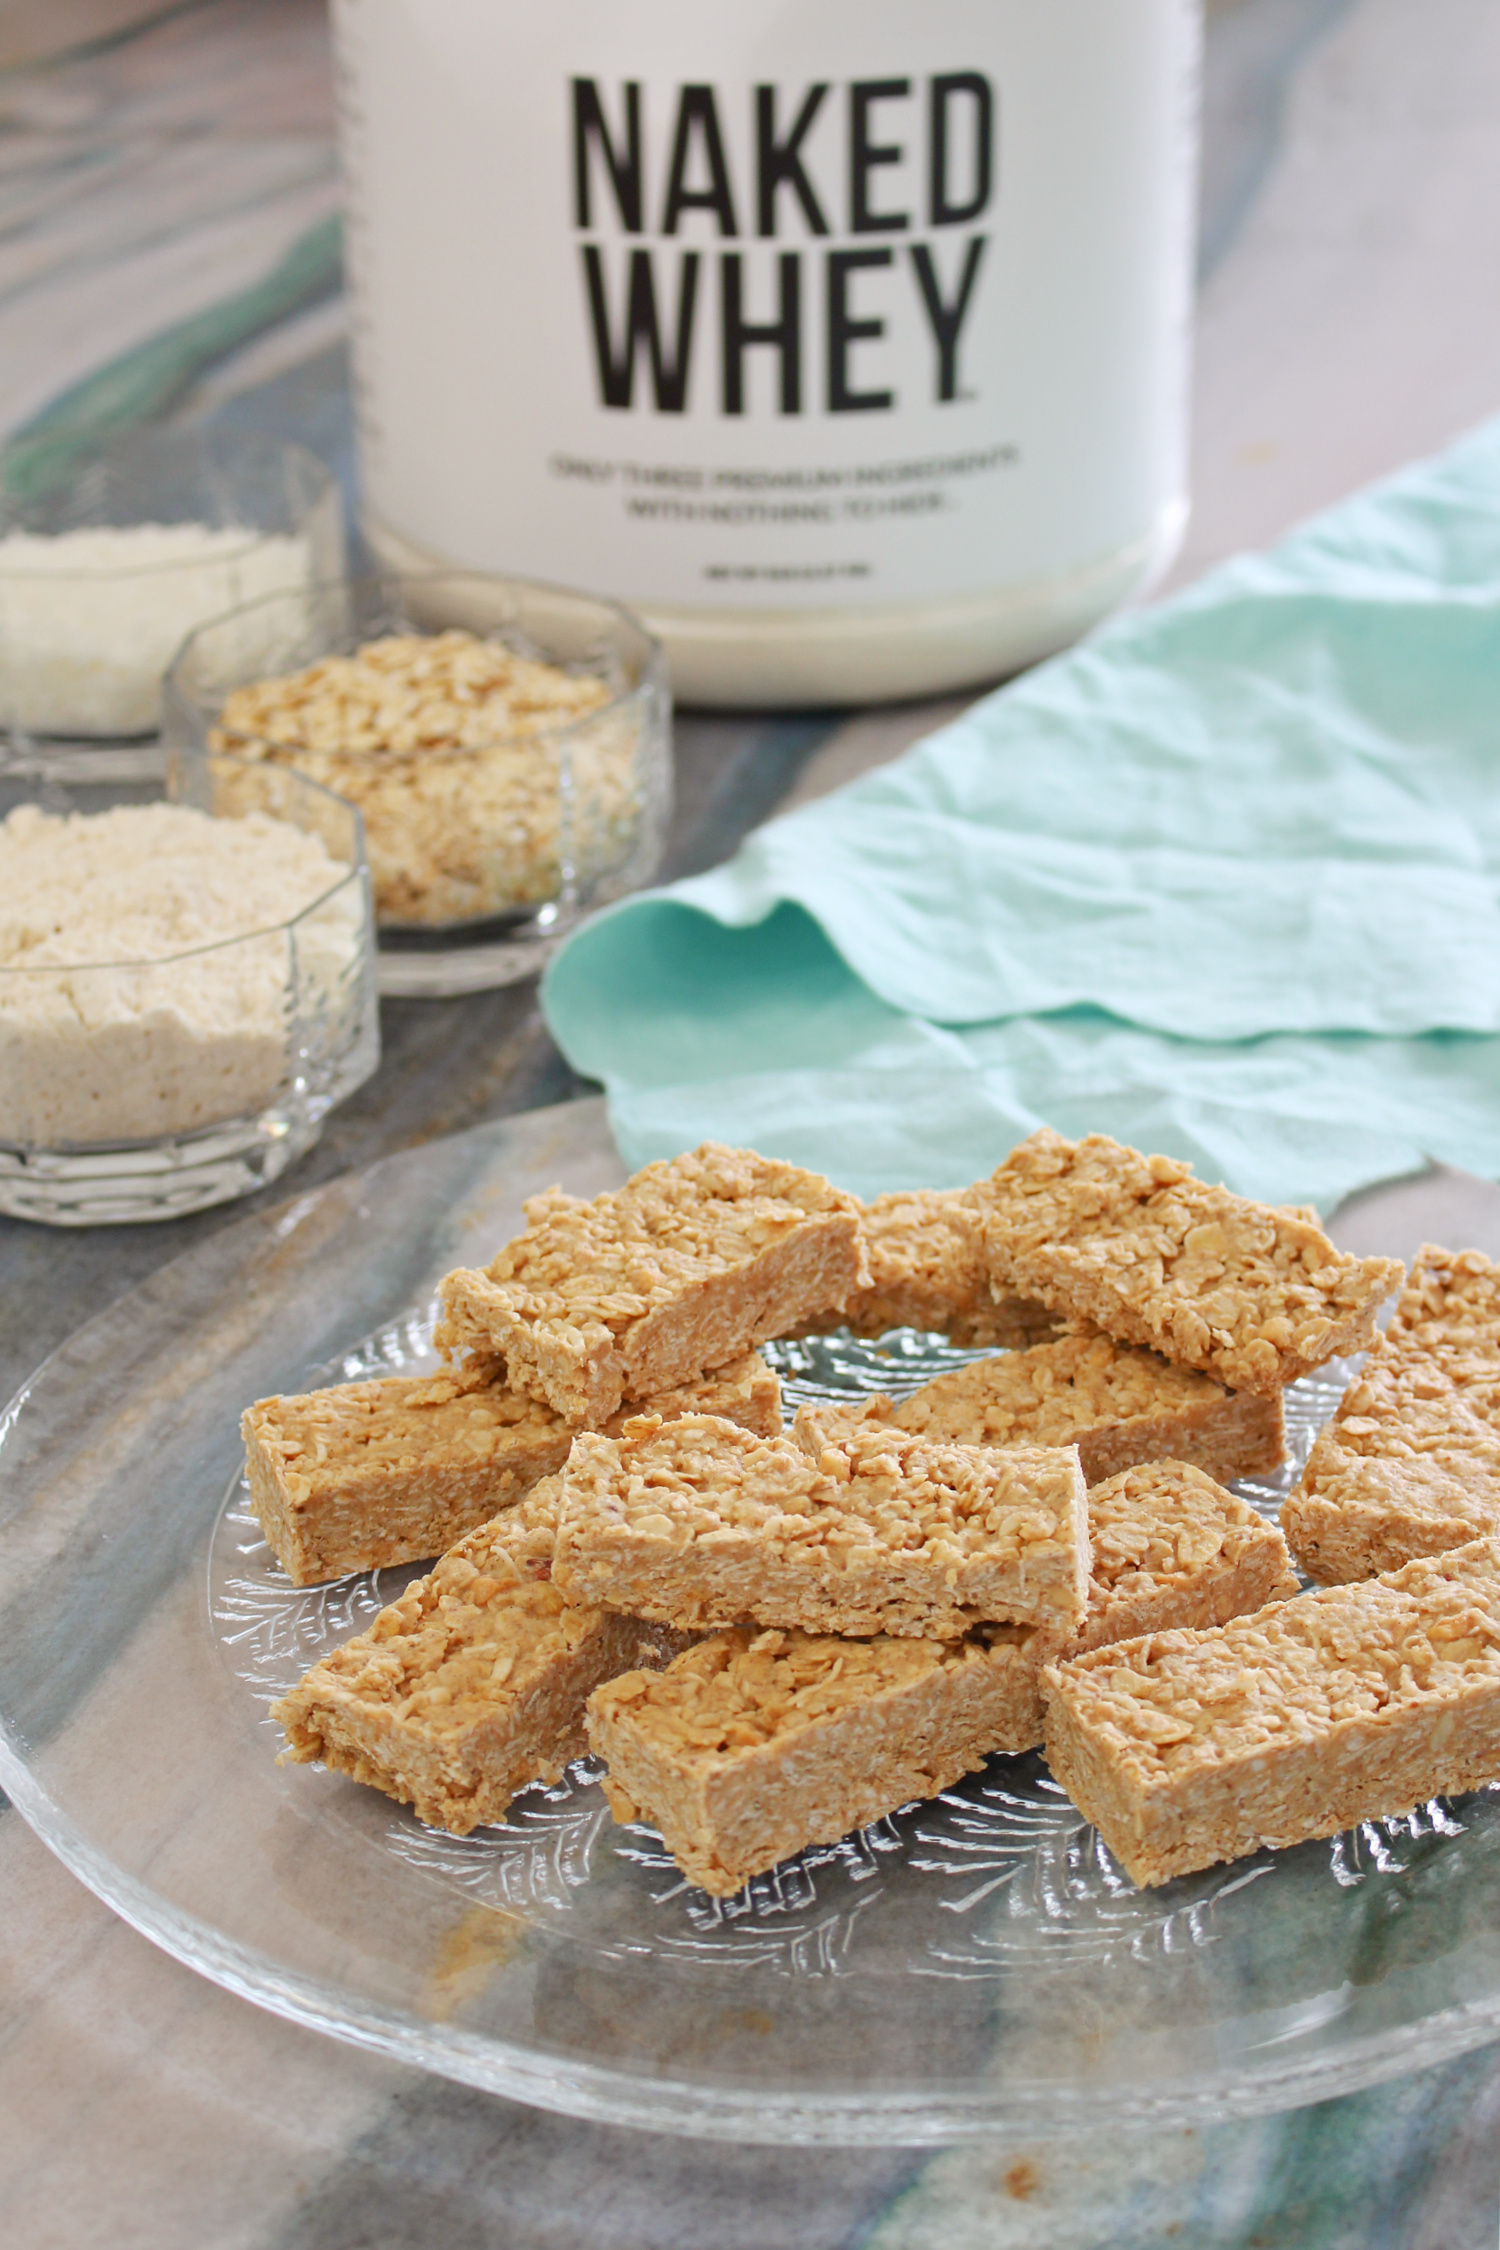 Naked Nutrition Naked Whey Protein Powder Bars